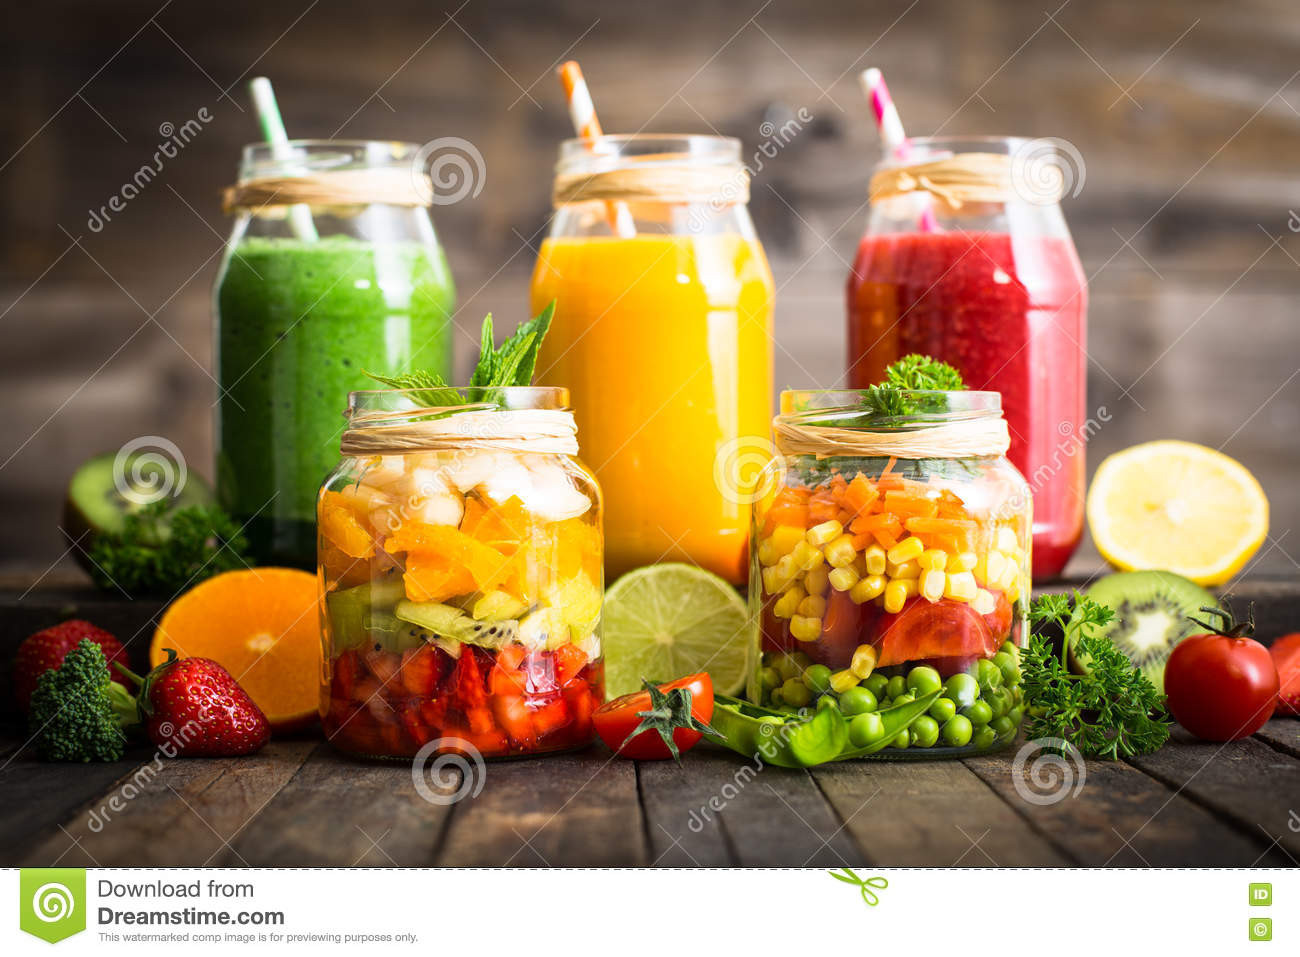 Vegetables And Fruits Smoothies
 Healthy Fruit And Ve able Salad And Smoothies Stock